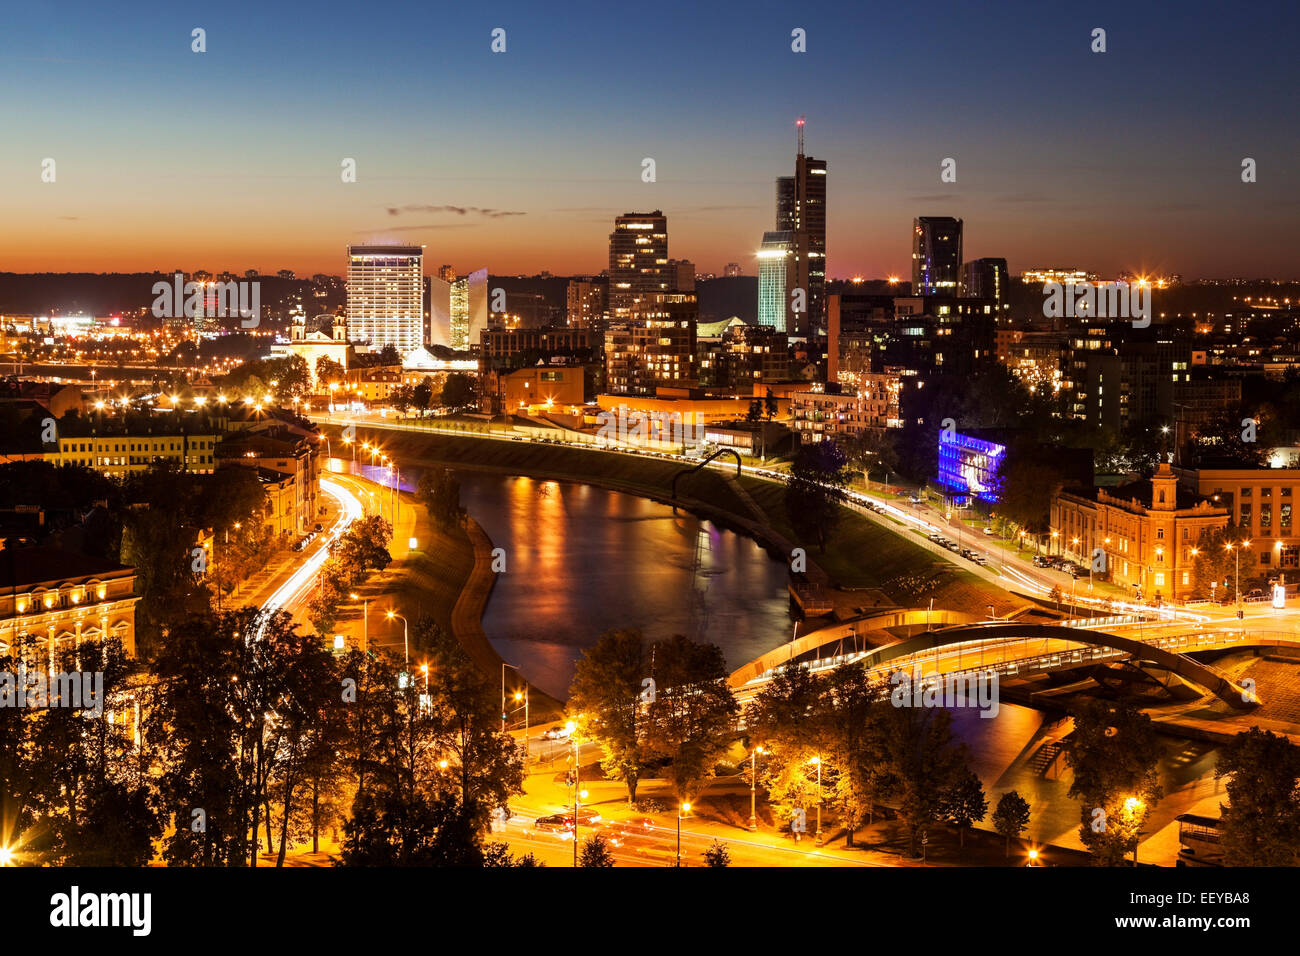 Lithuania, Vilnius, Illuminated riverfront cityscape seen from elevation on opposite bank Stock Photo